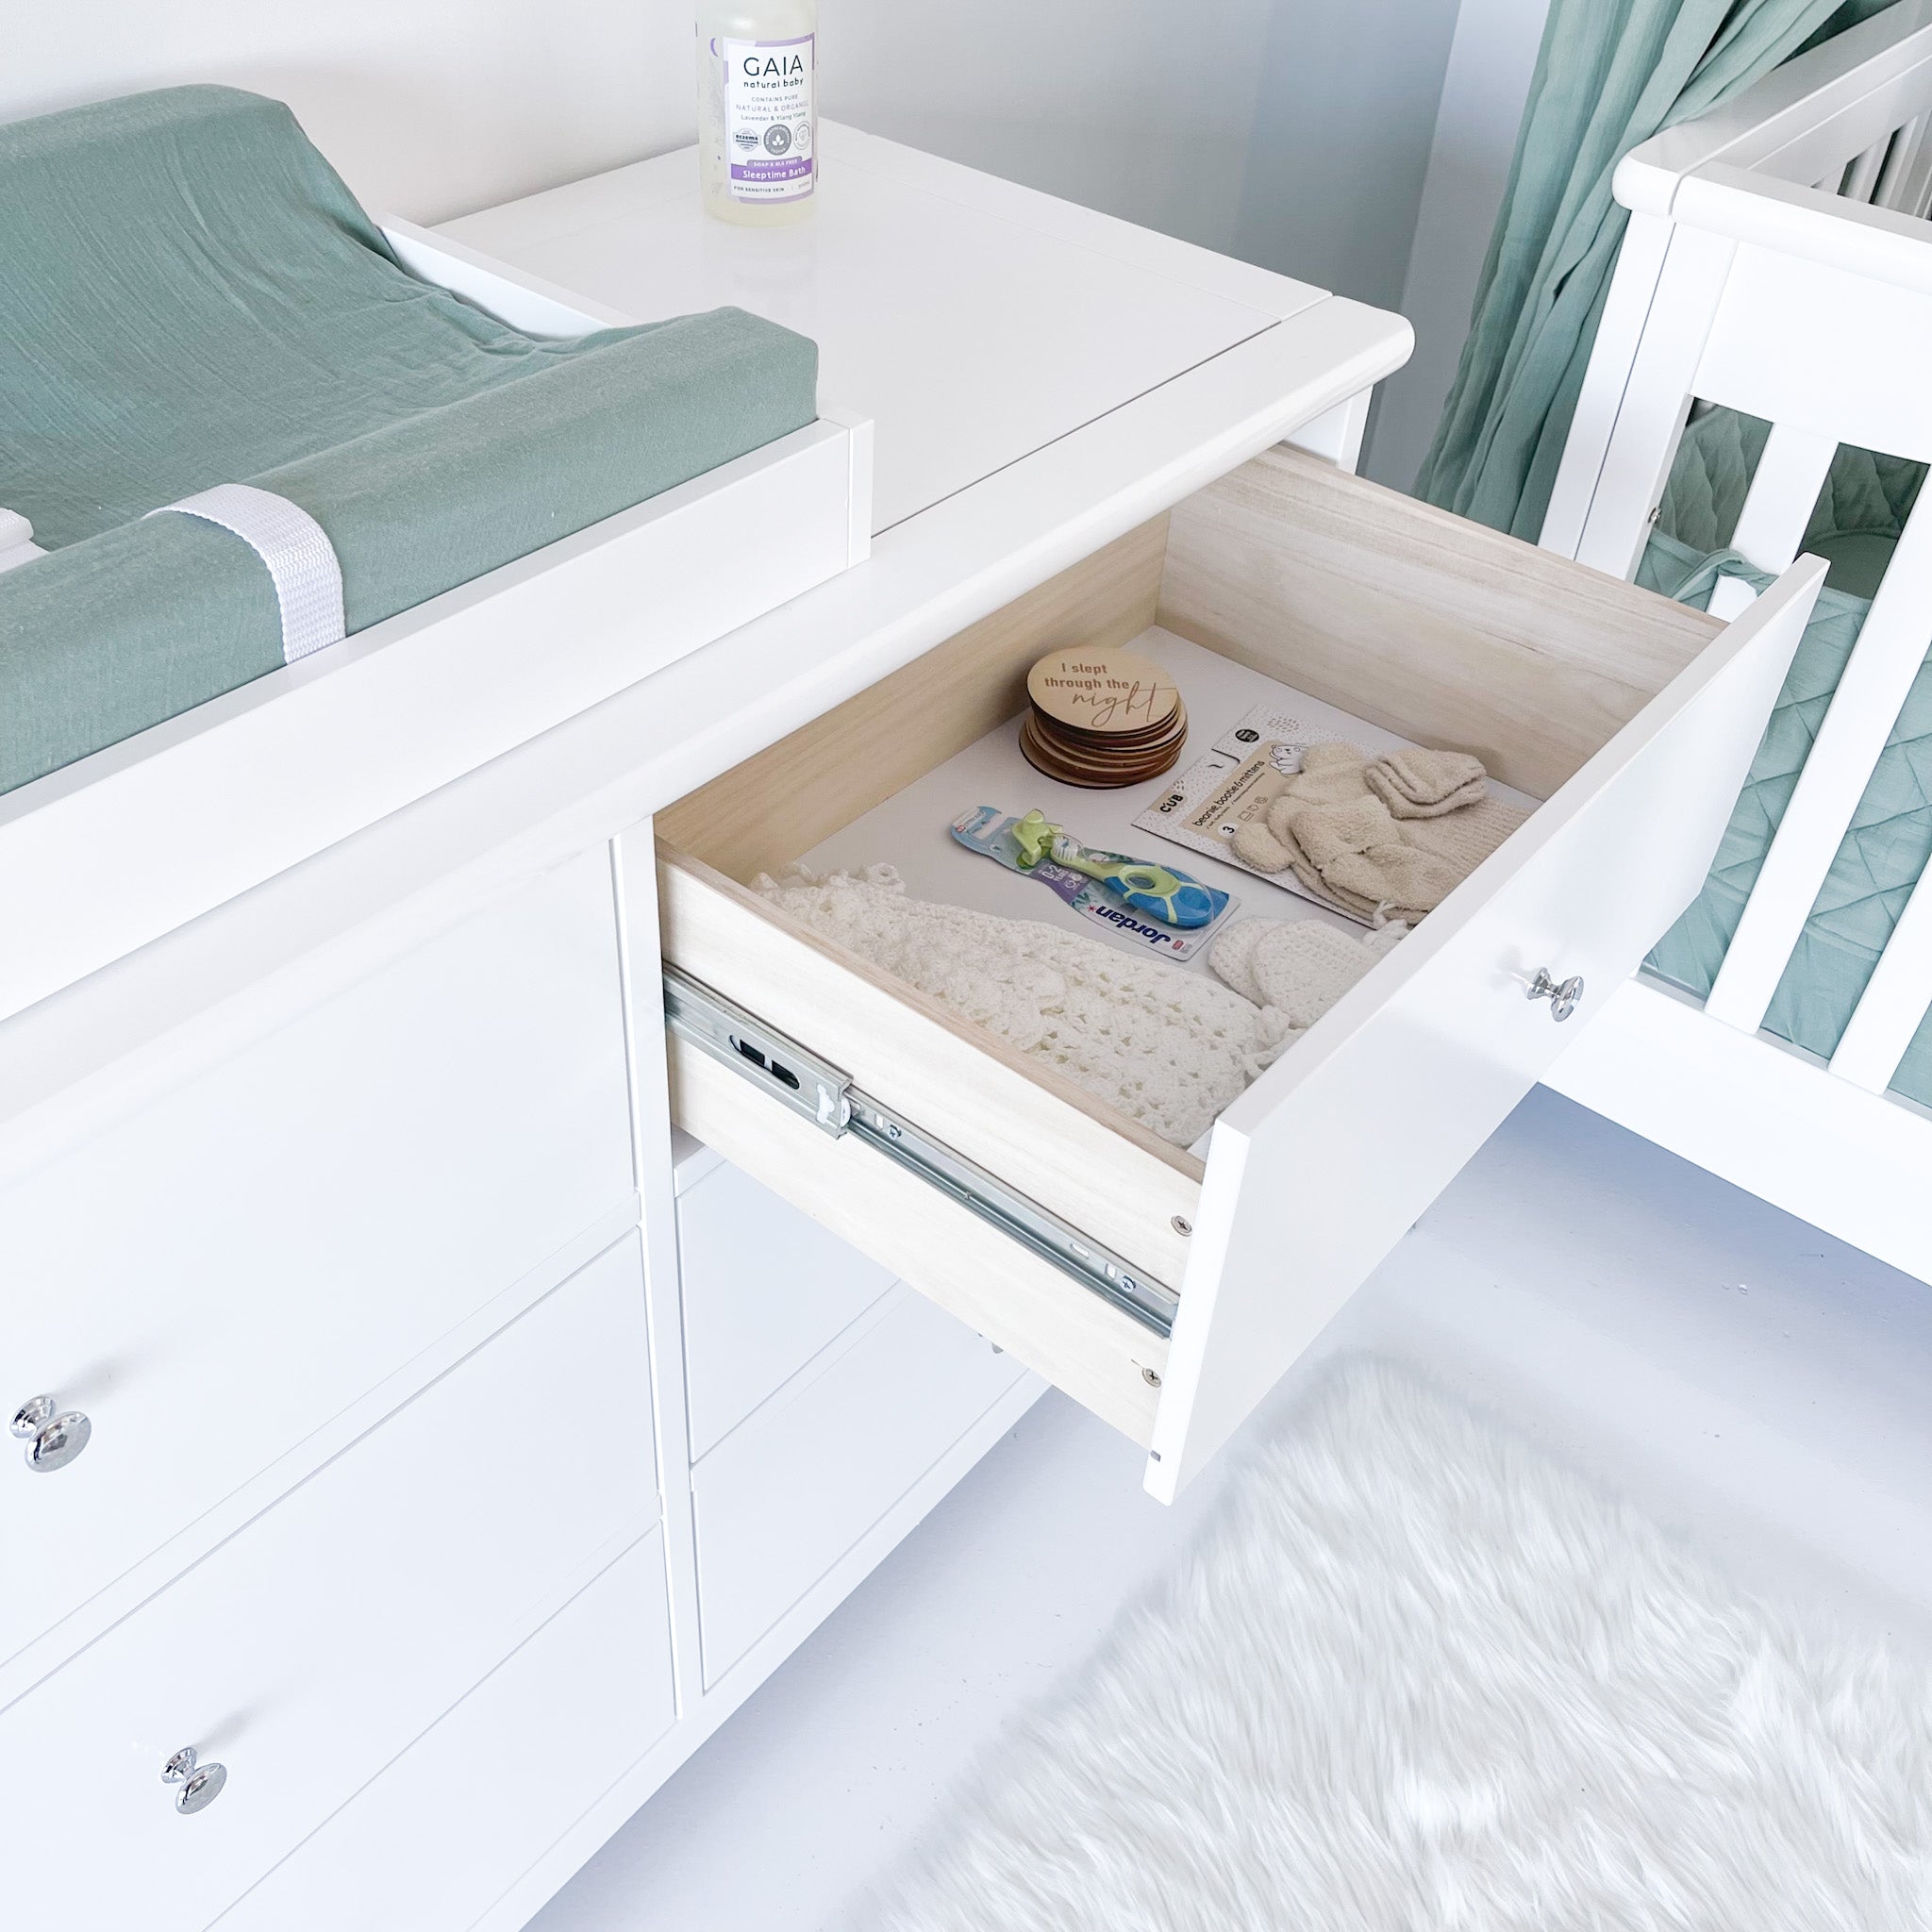 Heritage Cot with 6 Drawer Chest and Rocking Cradle